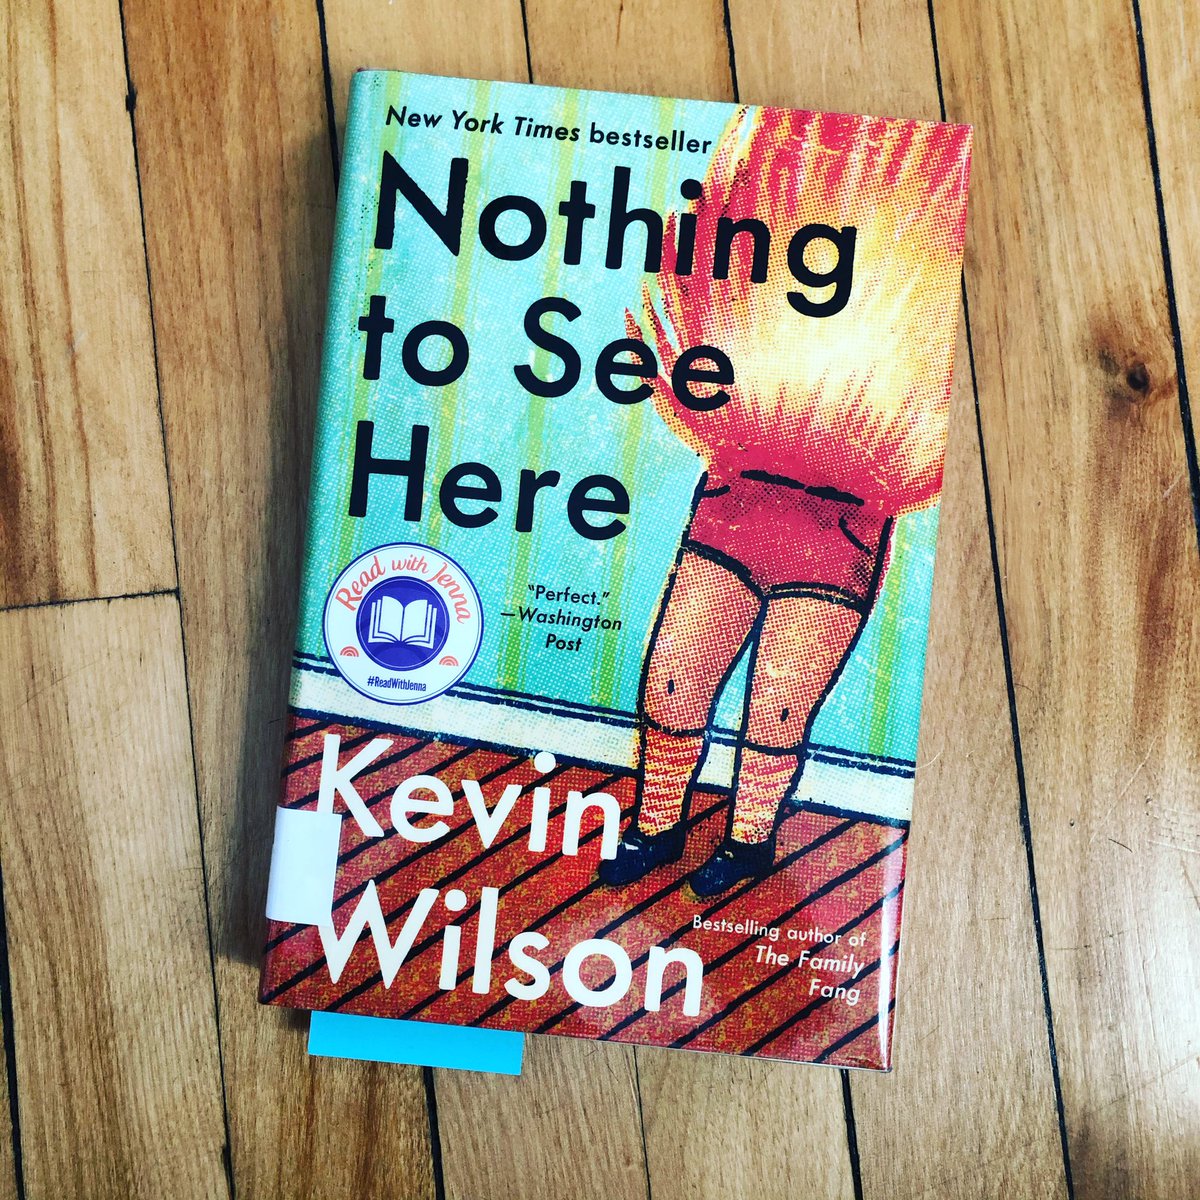 32/52Nothing to See Here by Kevin Wilson.     #52booksin52weeks  #2020books  #booksof2020  #pandemicreading